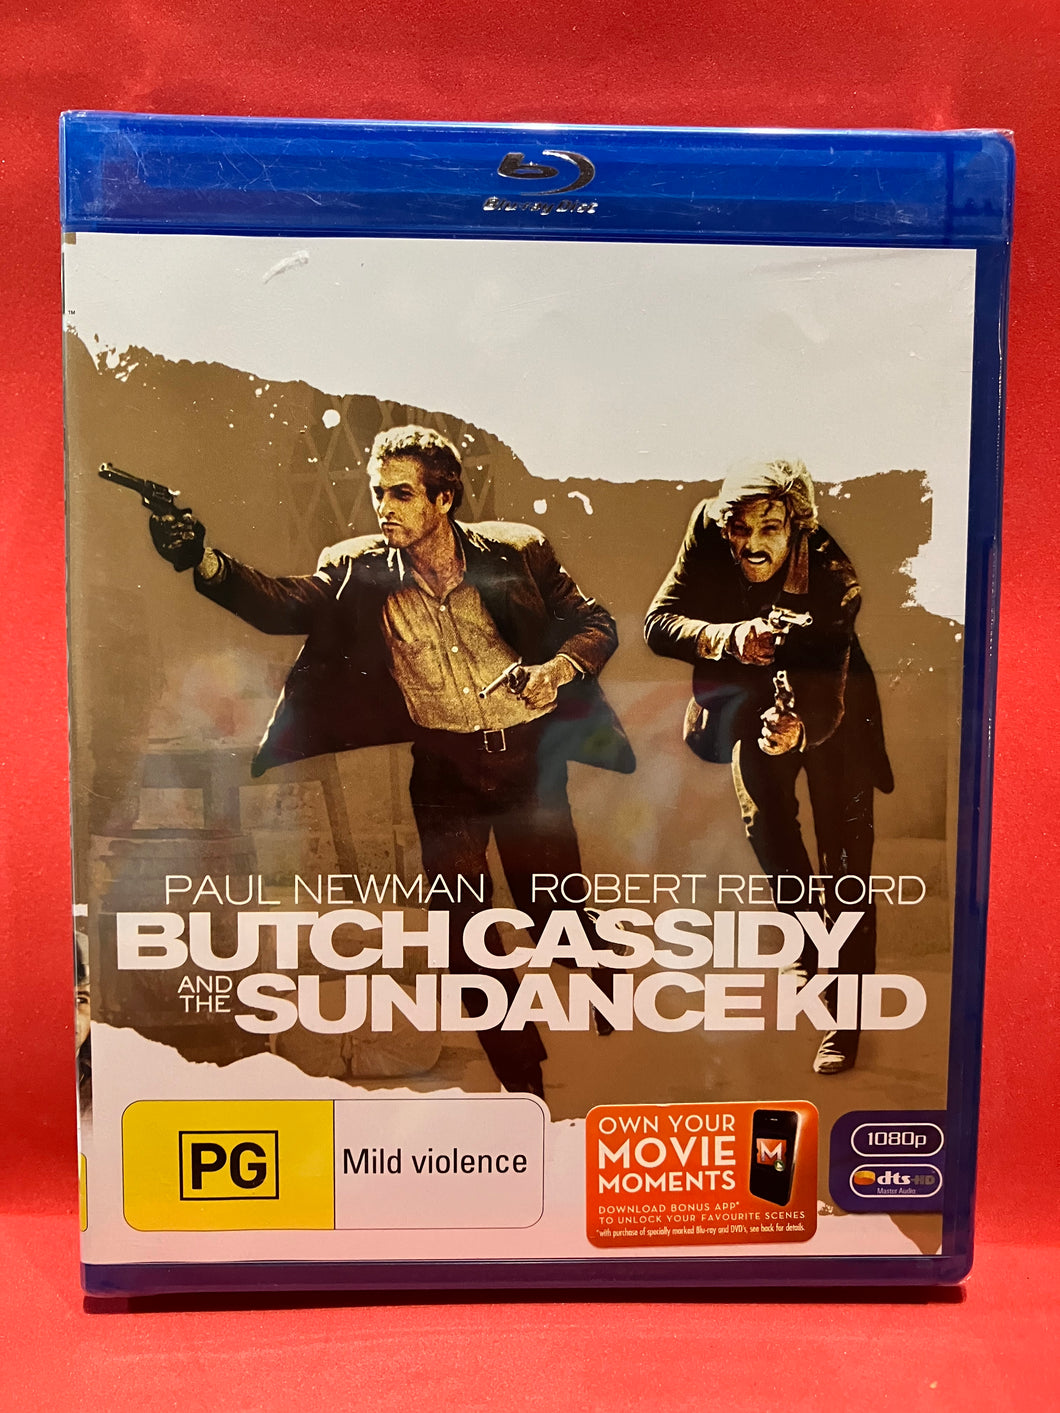 BUTCH CASSIDY AND THE SUNDANCE KID - BLU-RAY (SEALED)